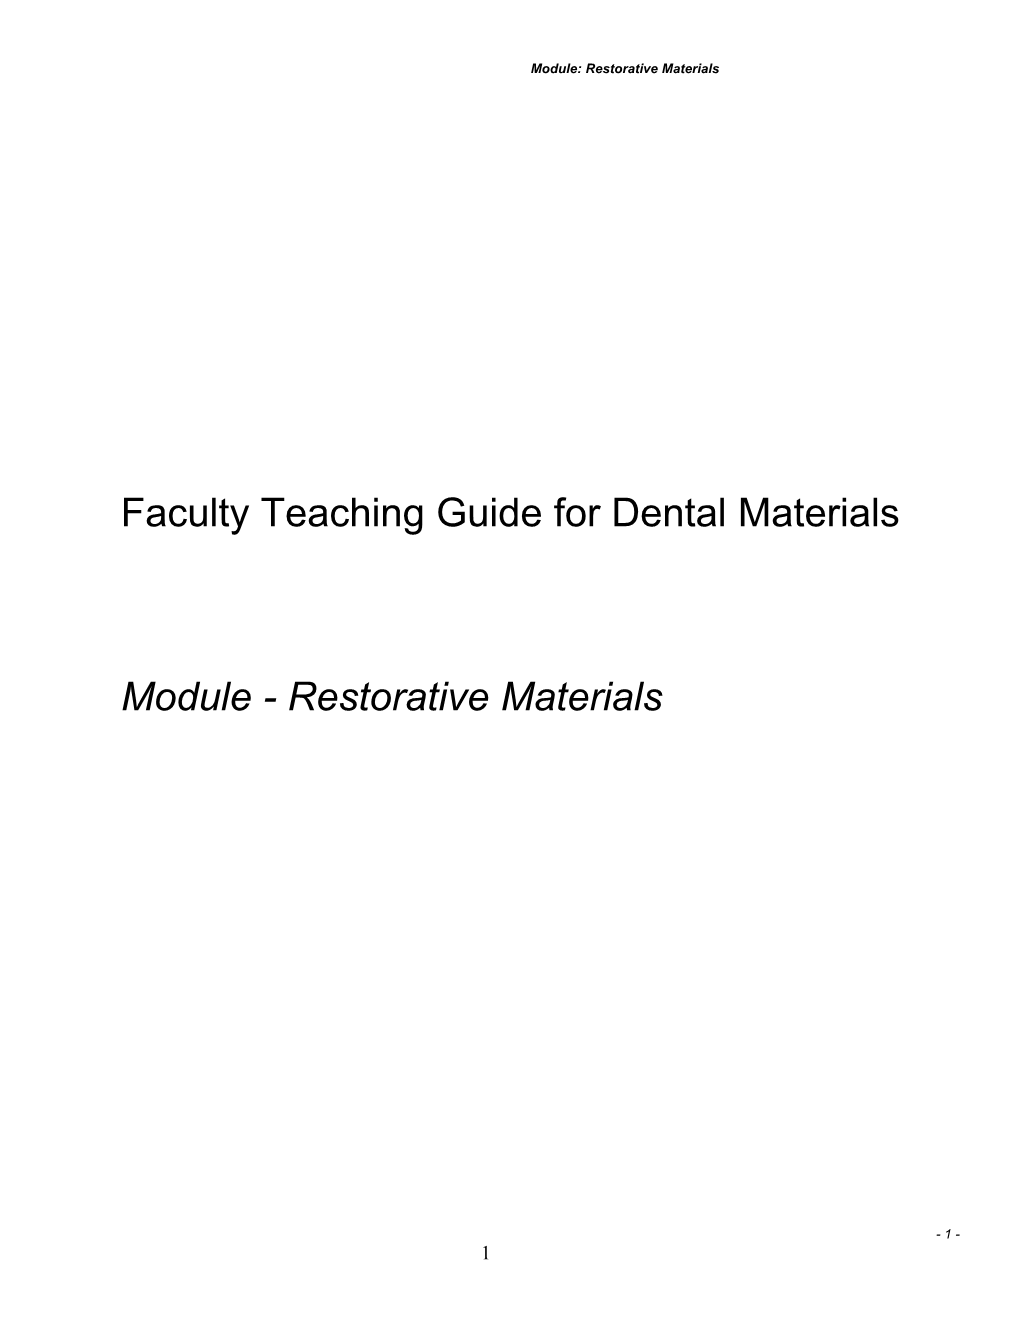 Faculty Teaching Guide for Dental Materials